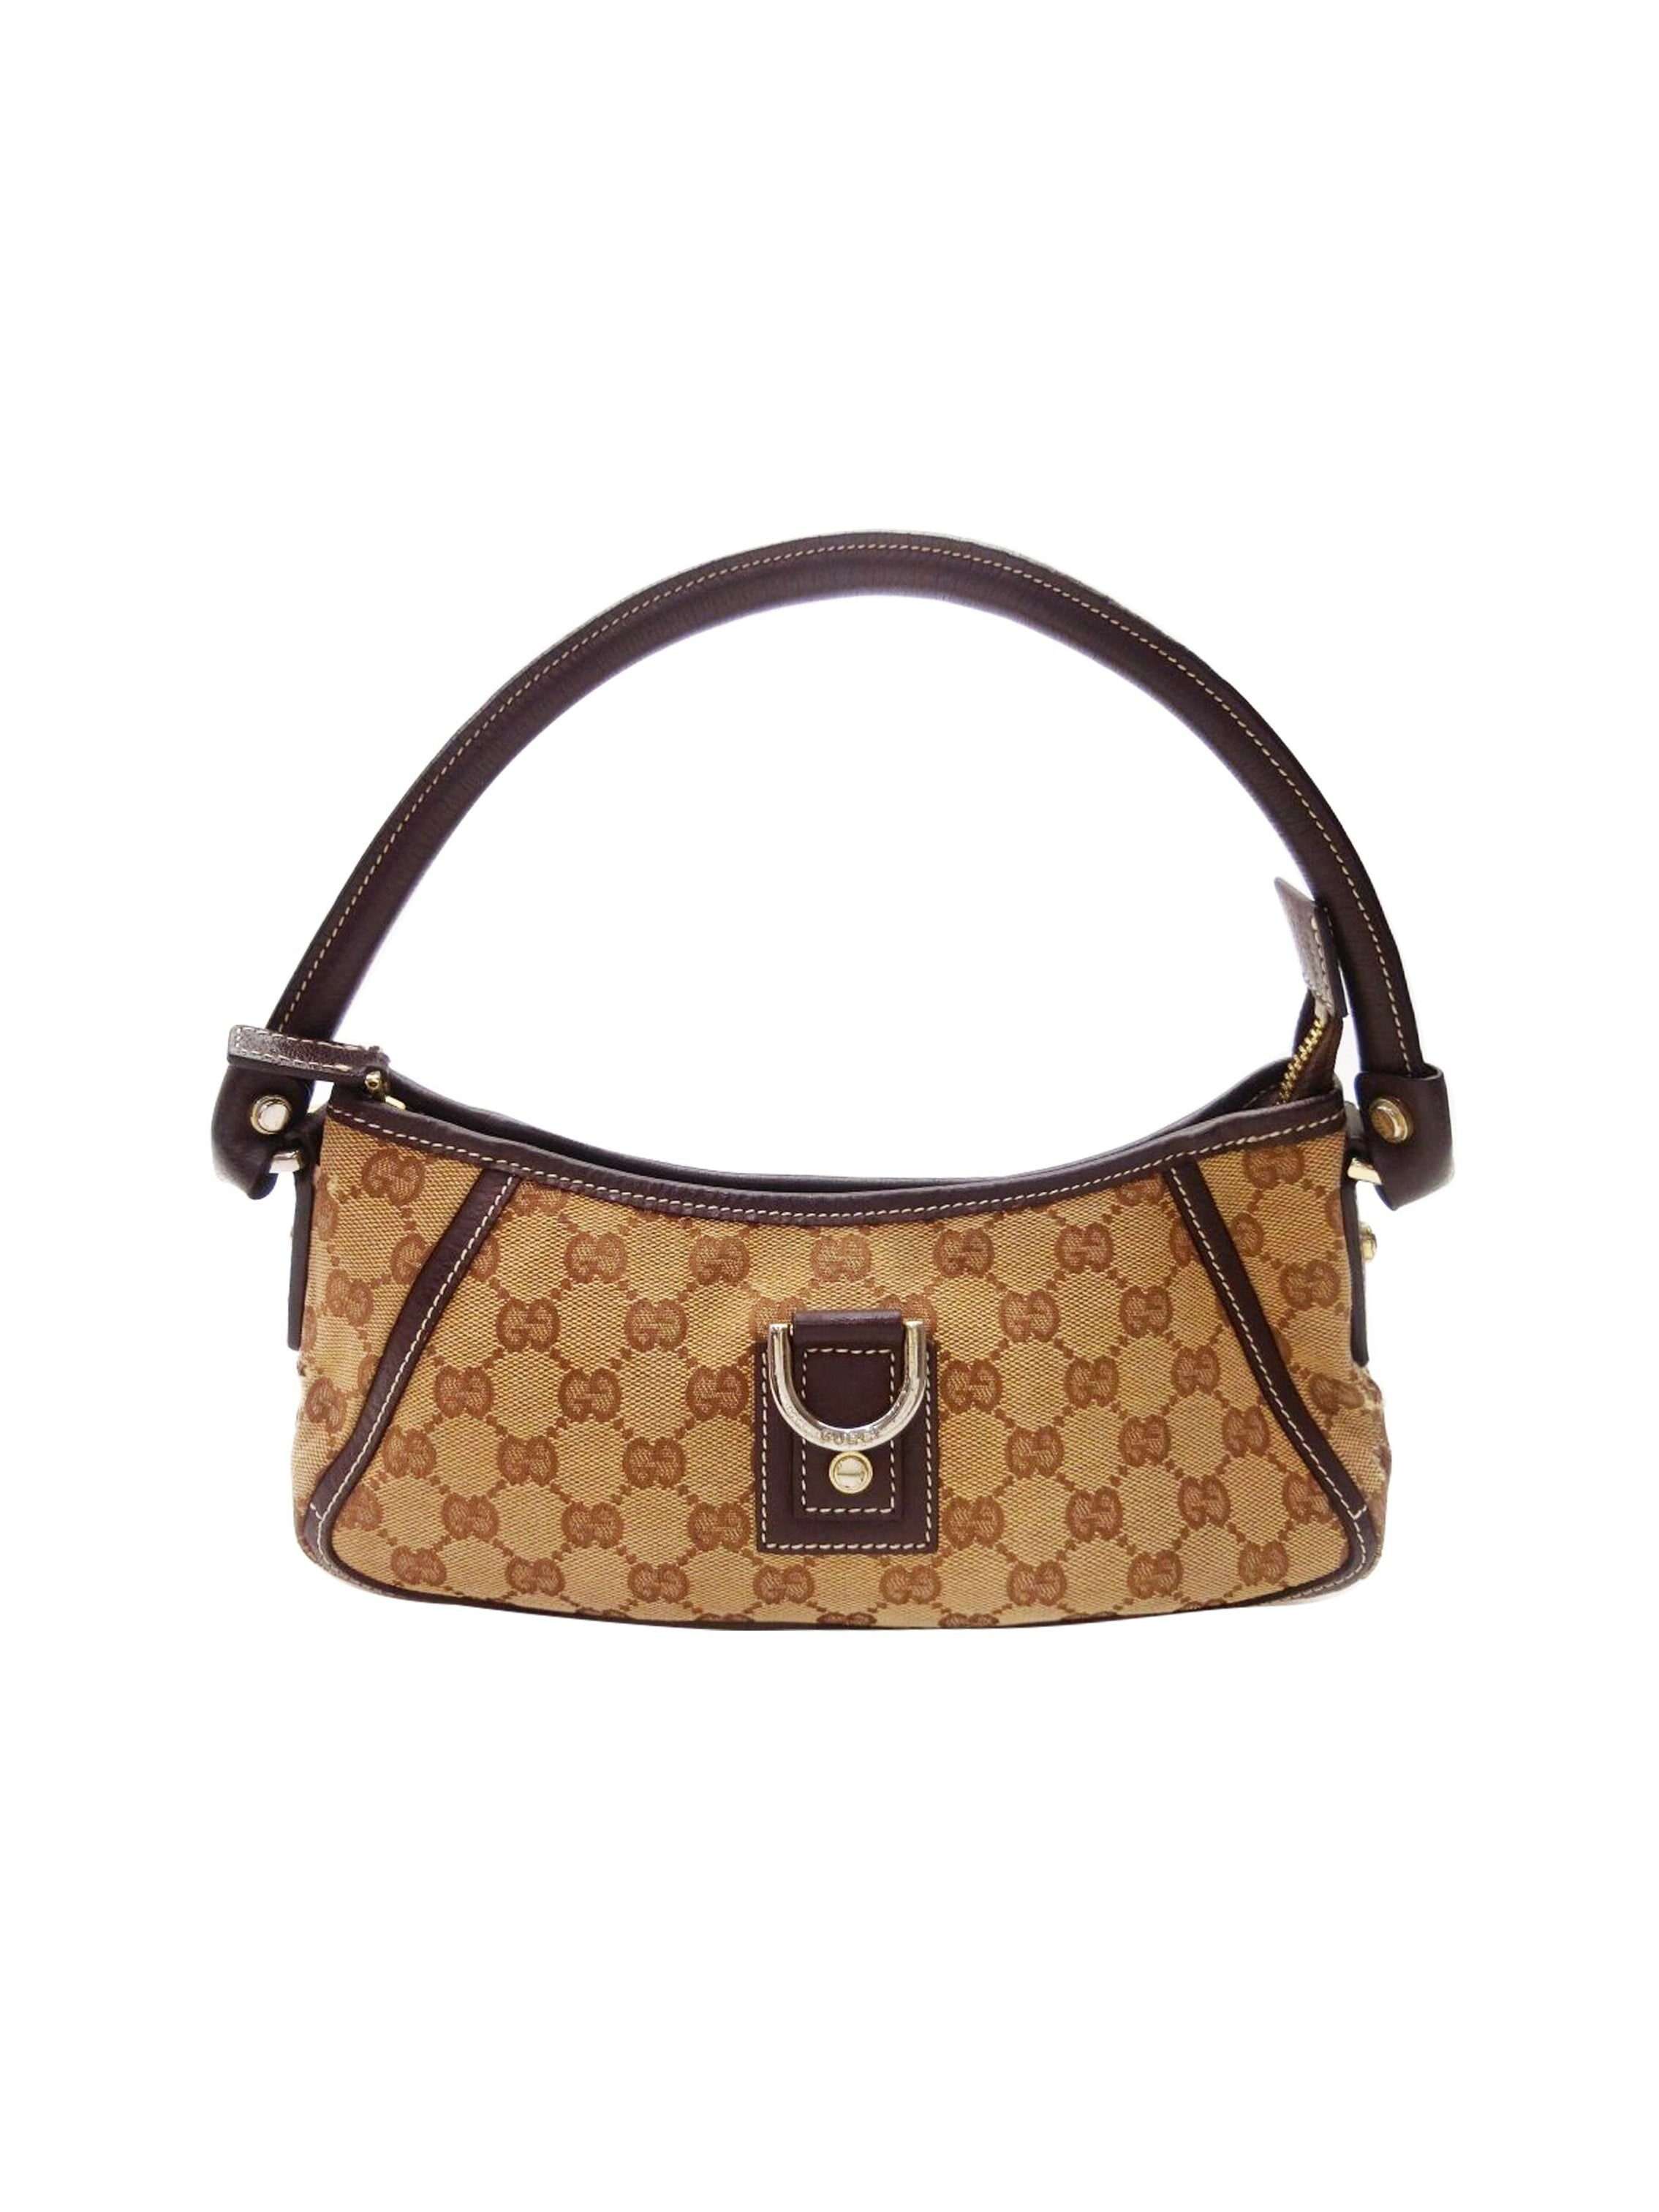 Gucci 2000s Beige Curved Buckle Small Hand Bag